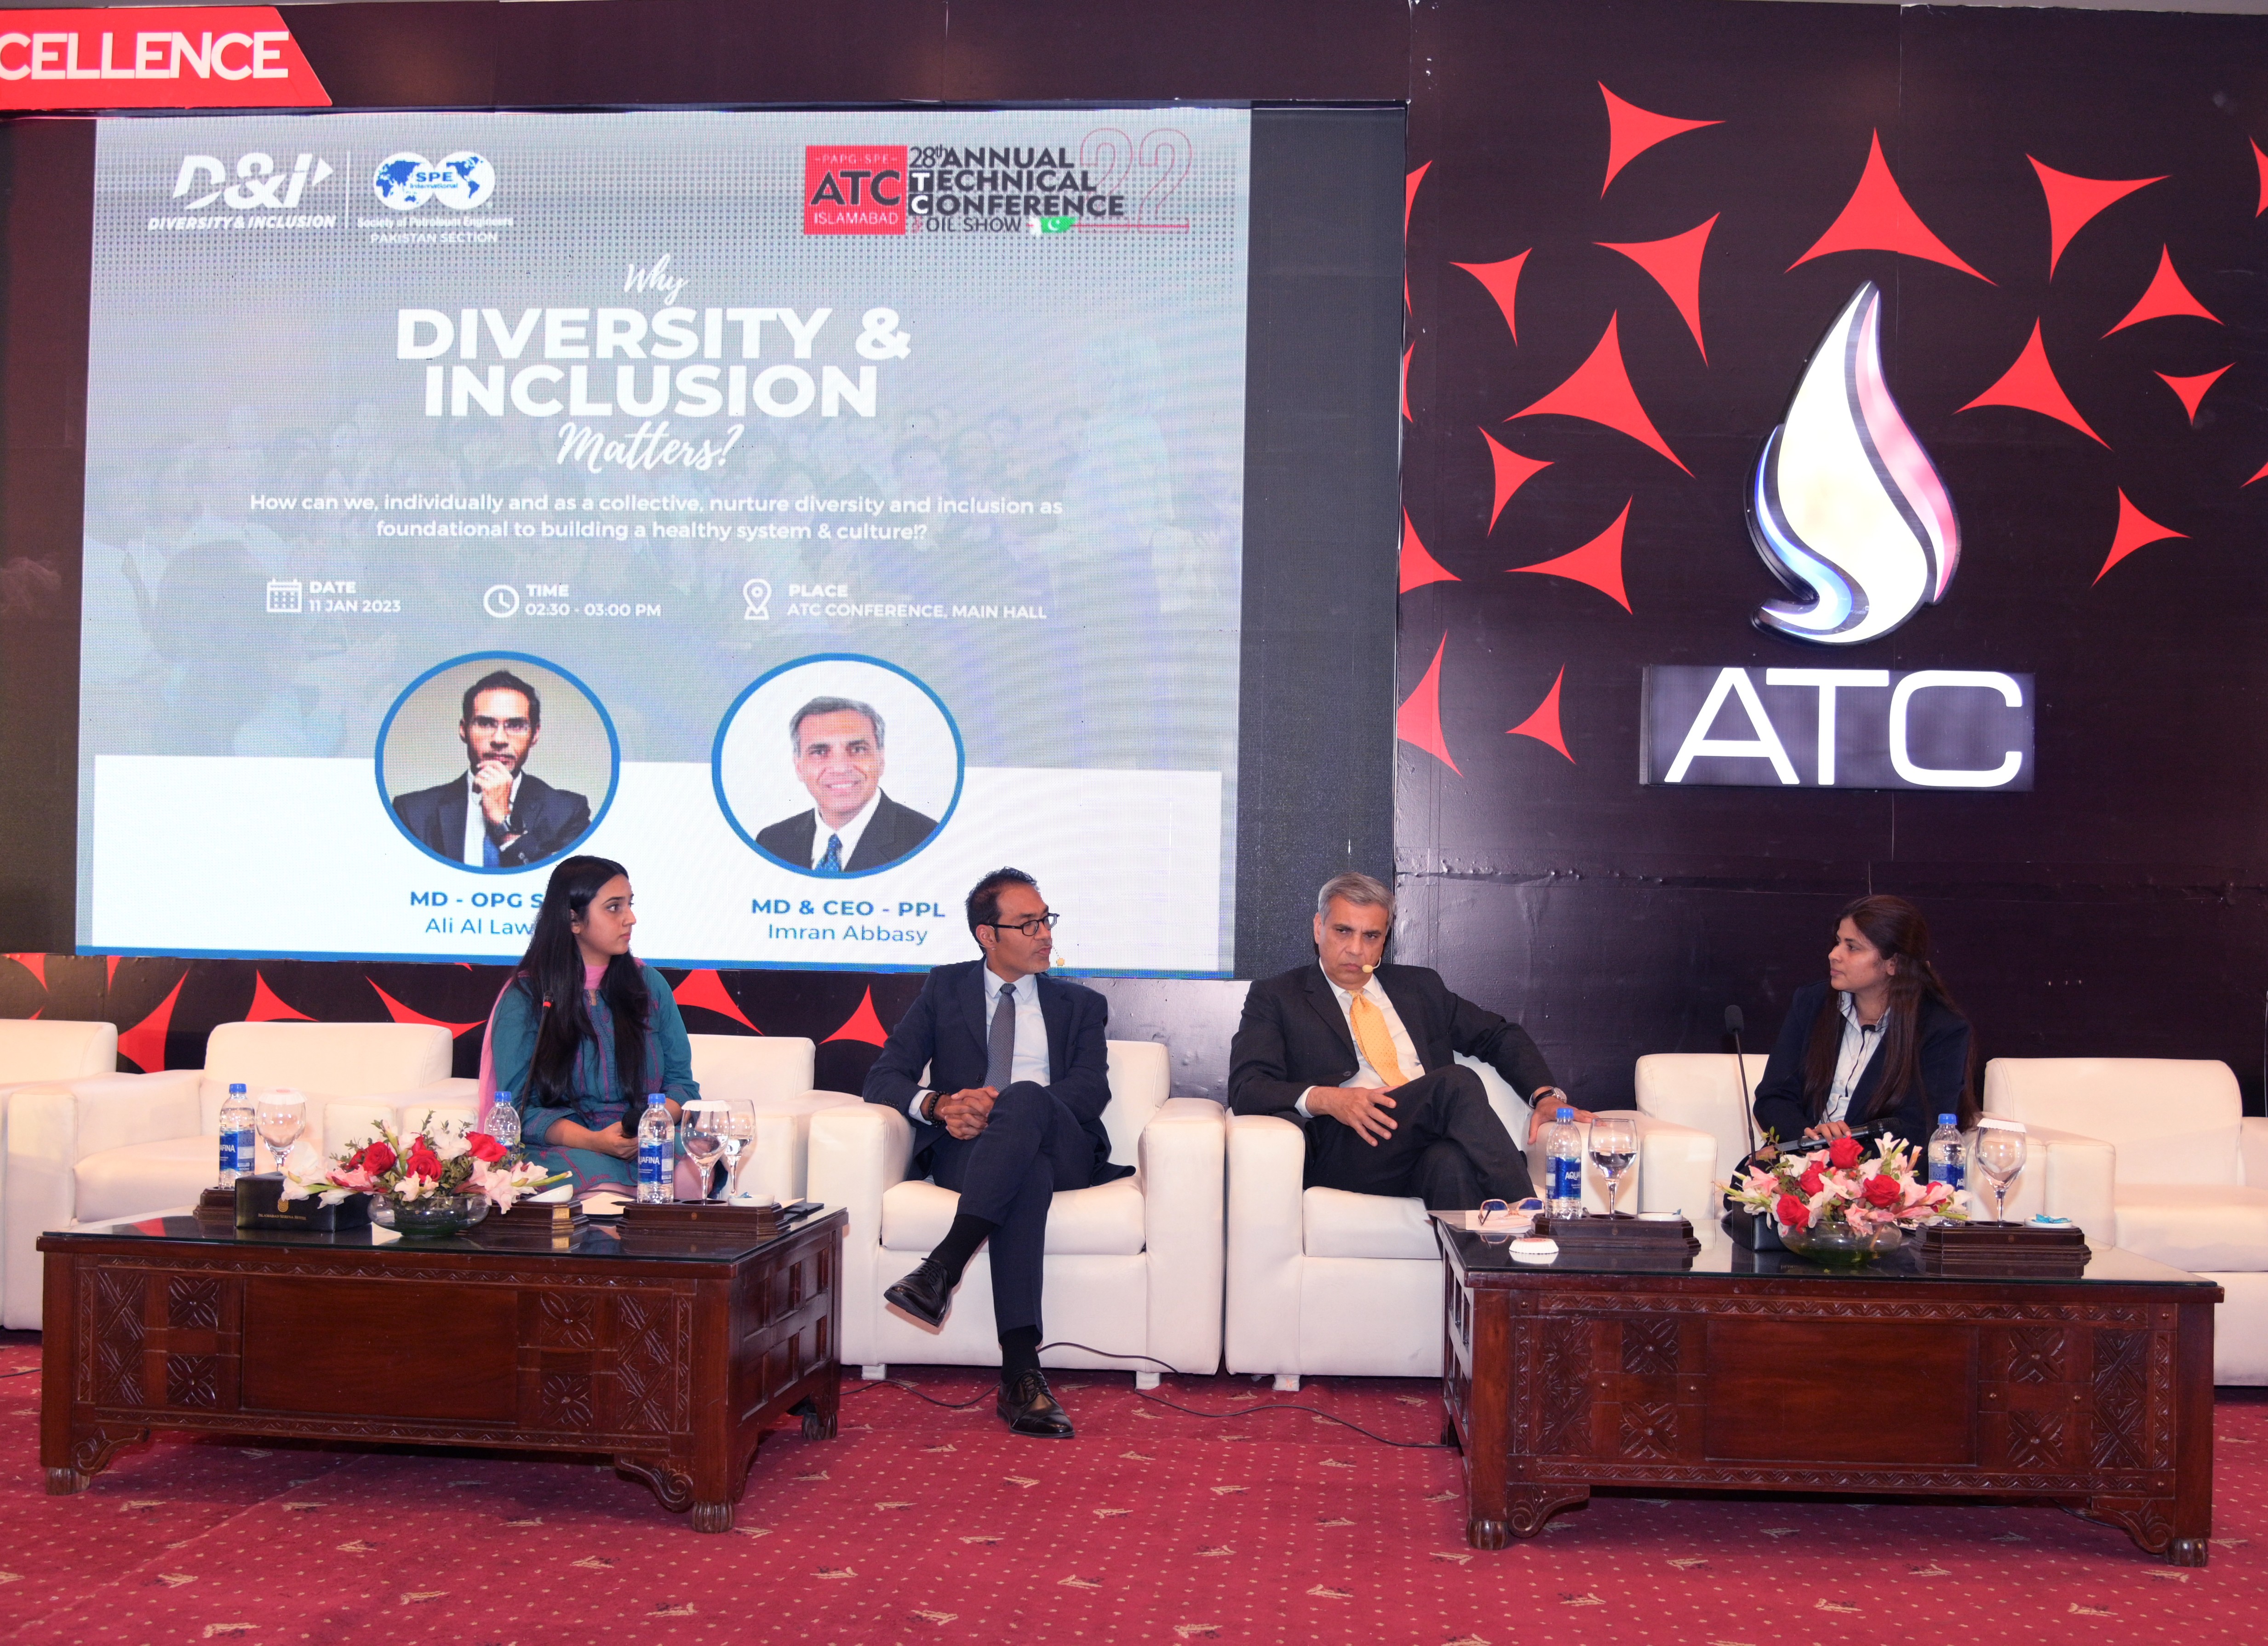 Mr Imran Abbasi the MD and CEO of Pakistan Petroleum Limited sharing his views at ATC conference